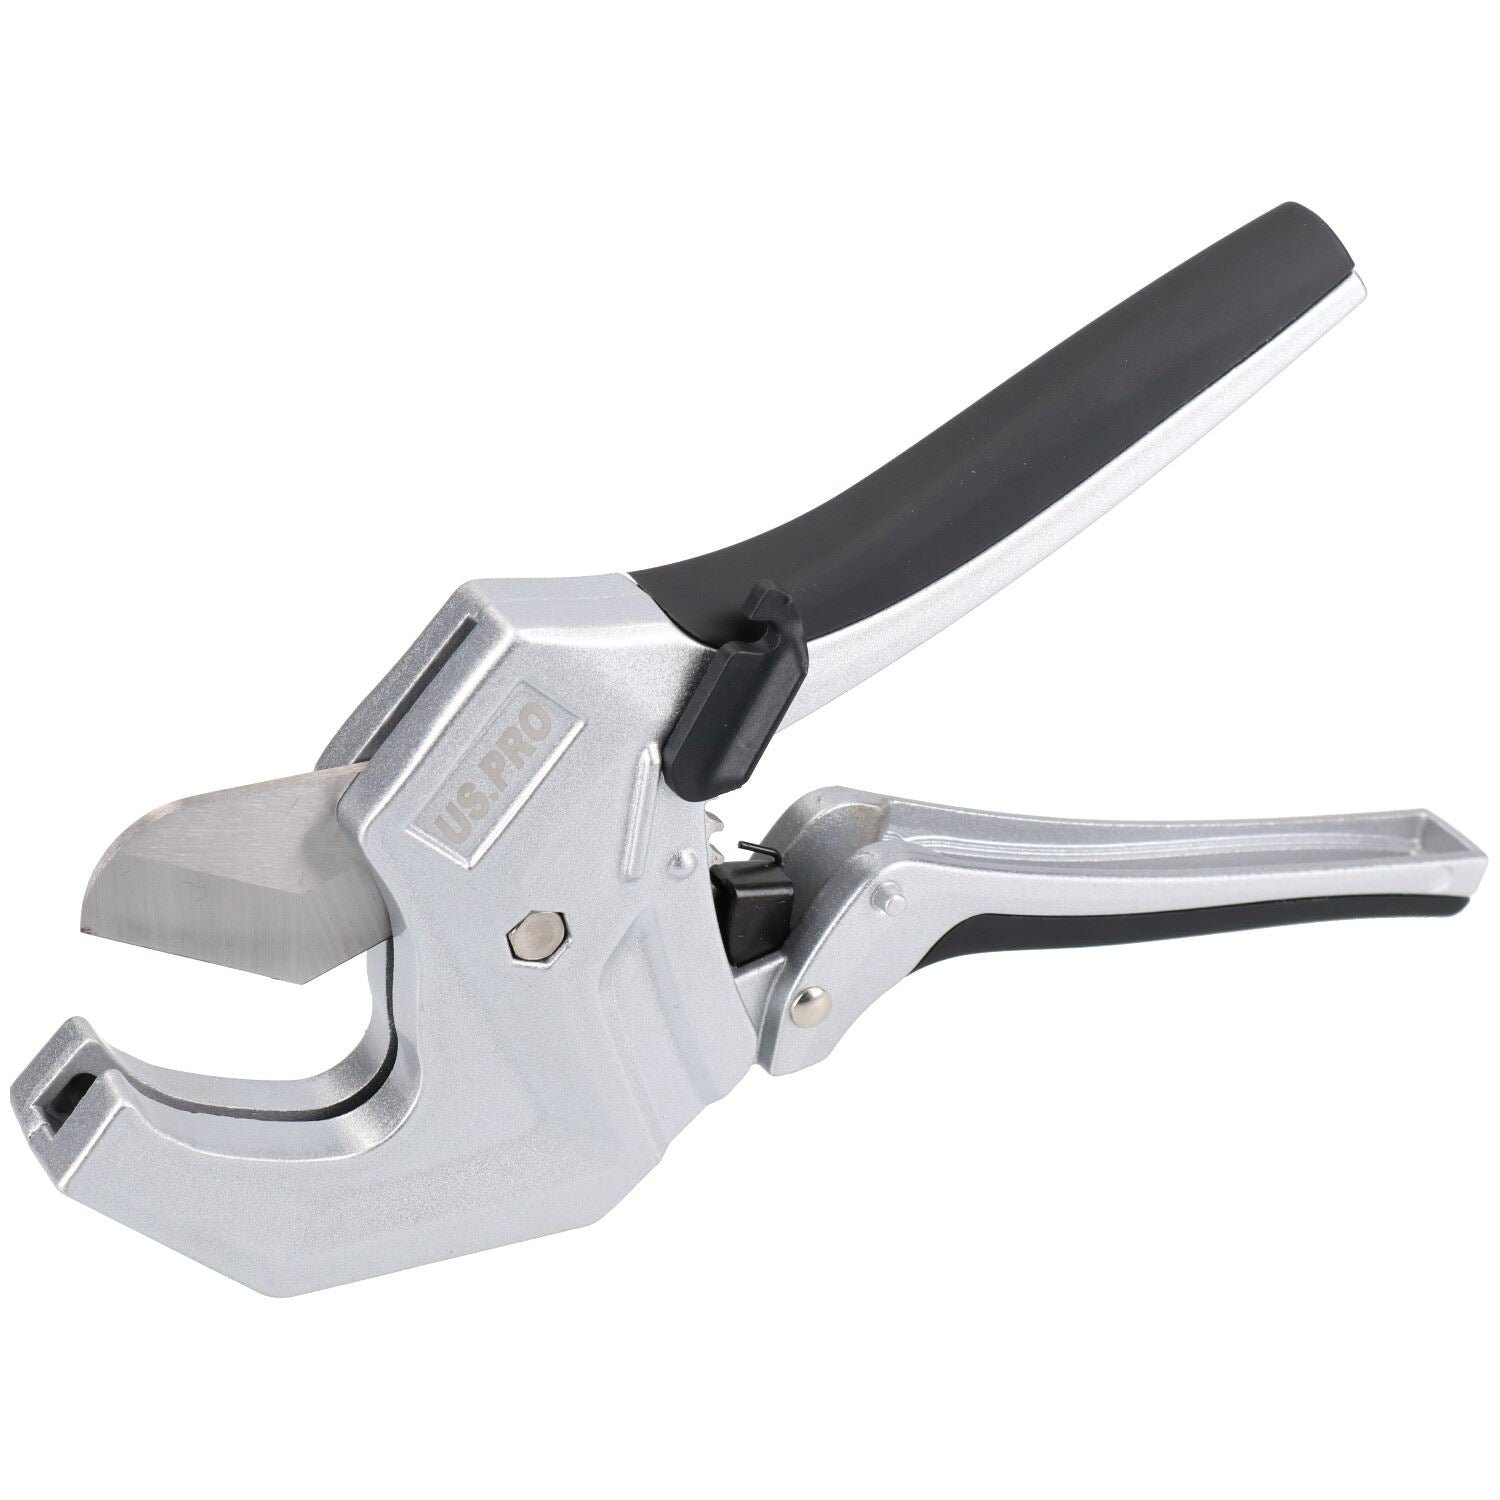 PVC Ratchet Plastic Pipe Cutter Cutting Tool Stainless Steel Blade Up To 42mm